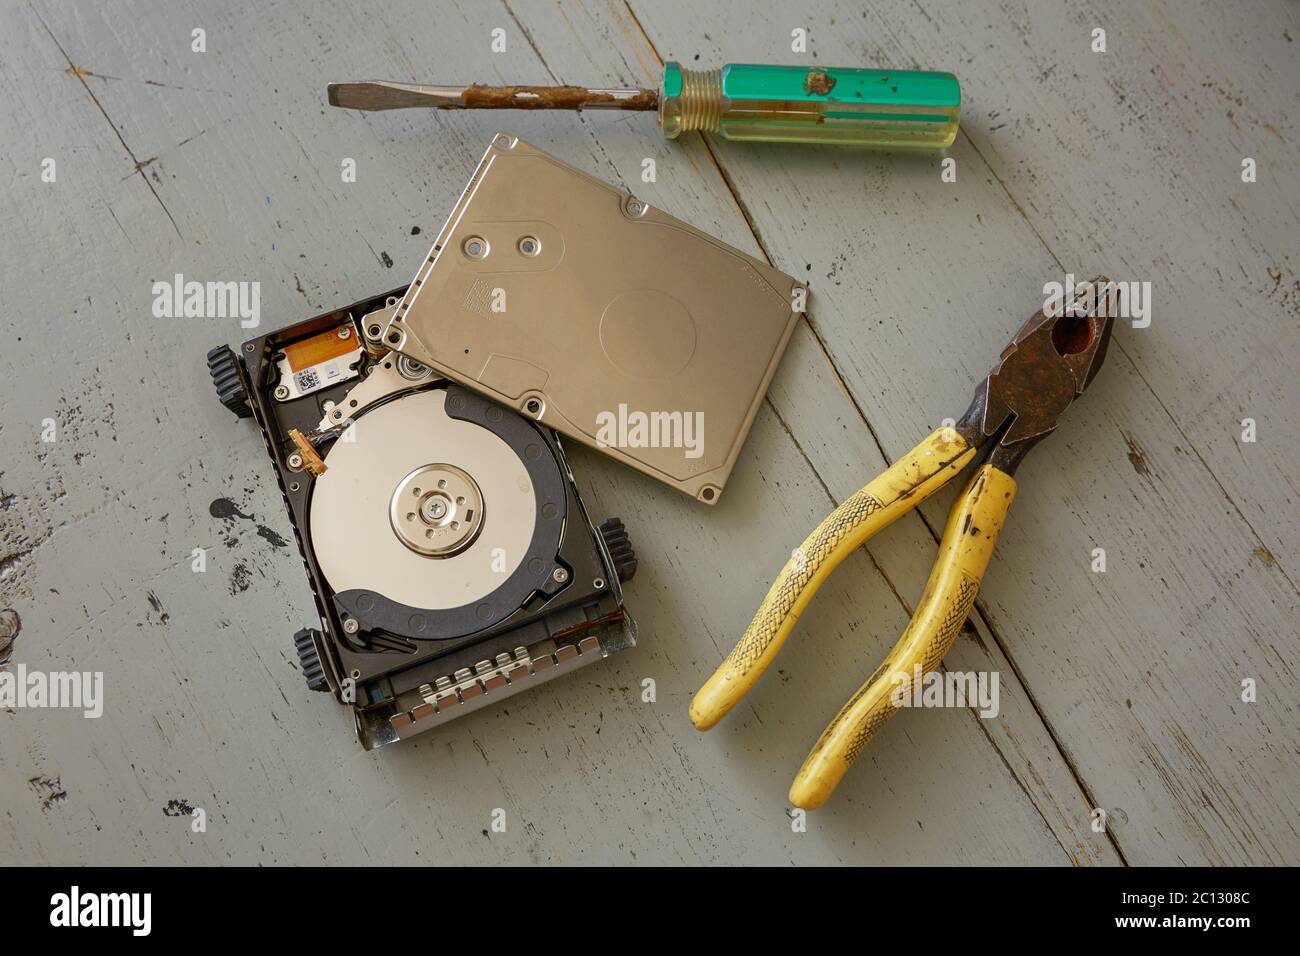 Broken and Destroyed Hard Drive Disk and Tools on Wooden Table Stock Photo